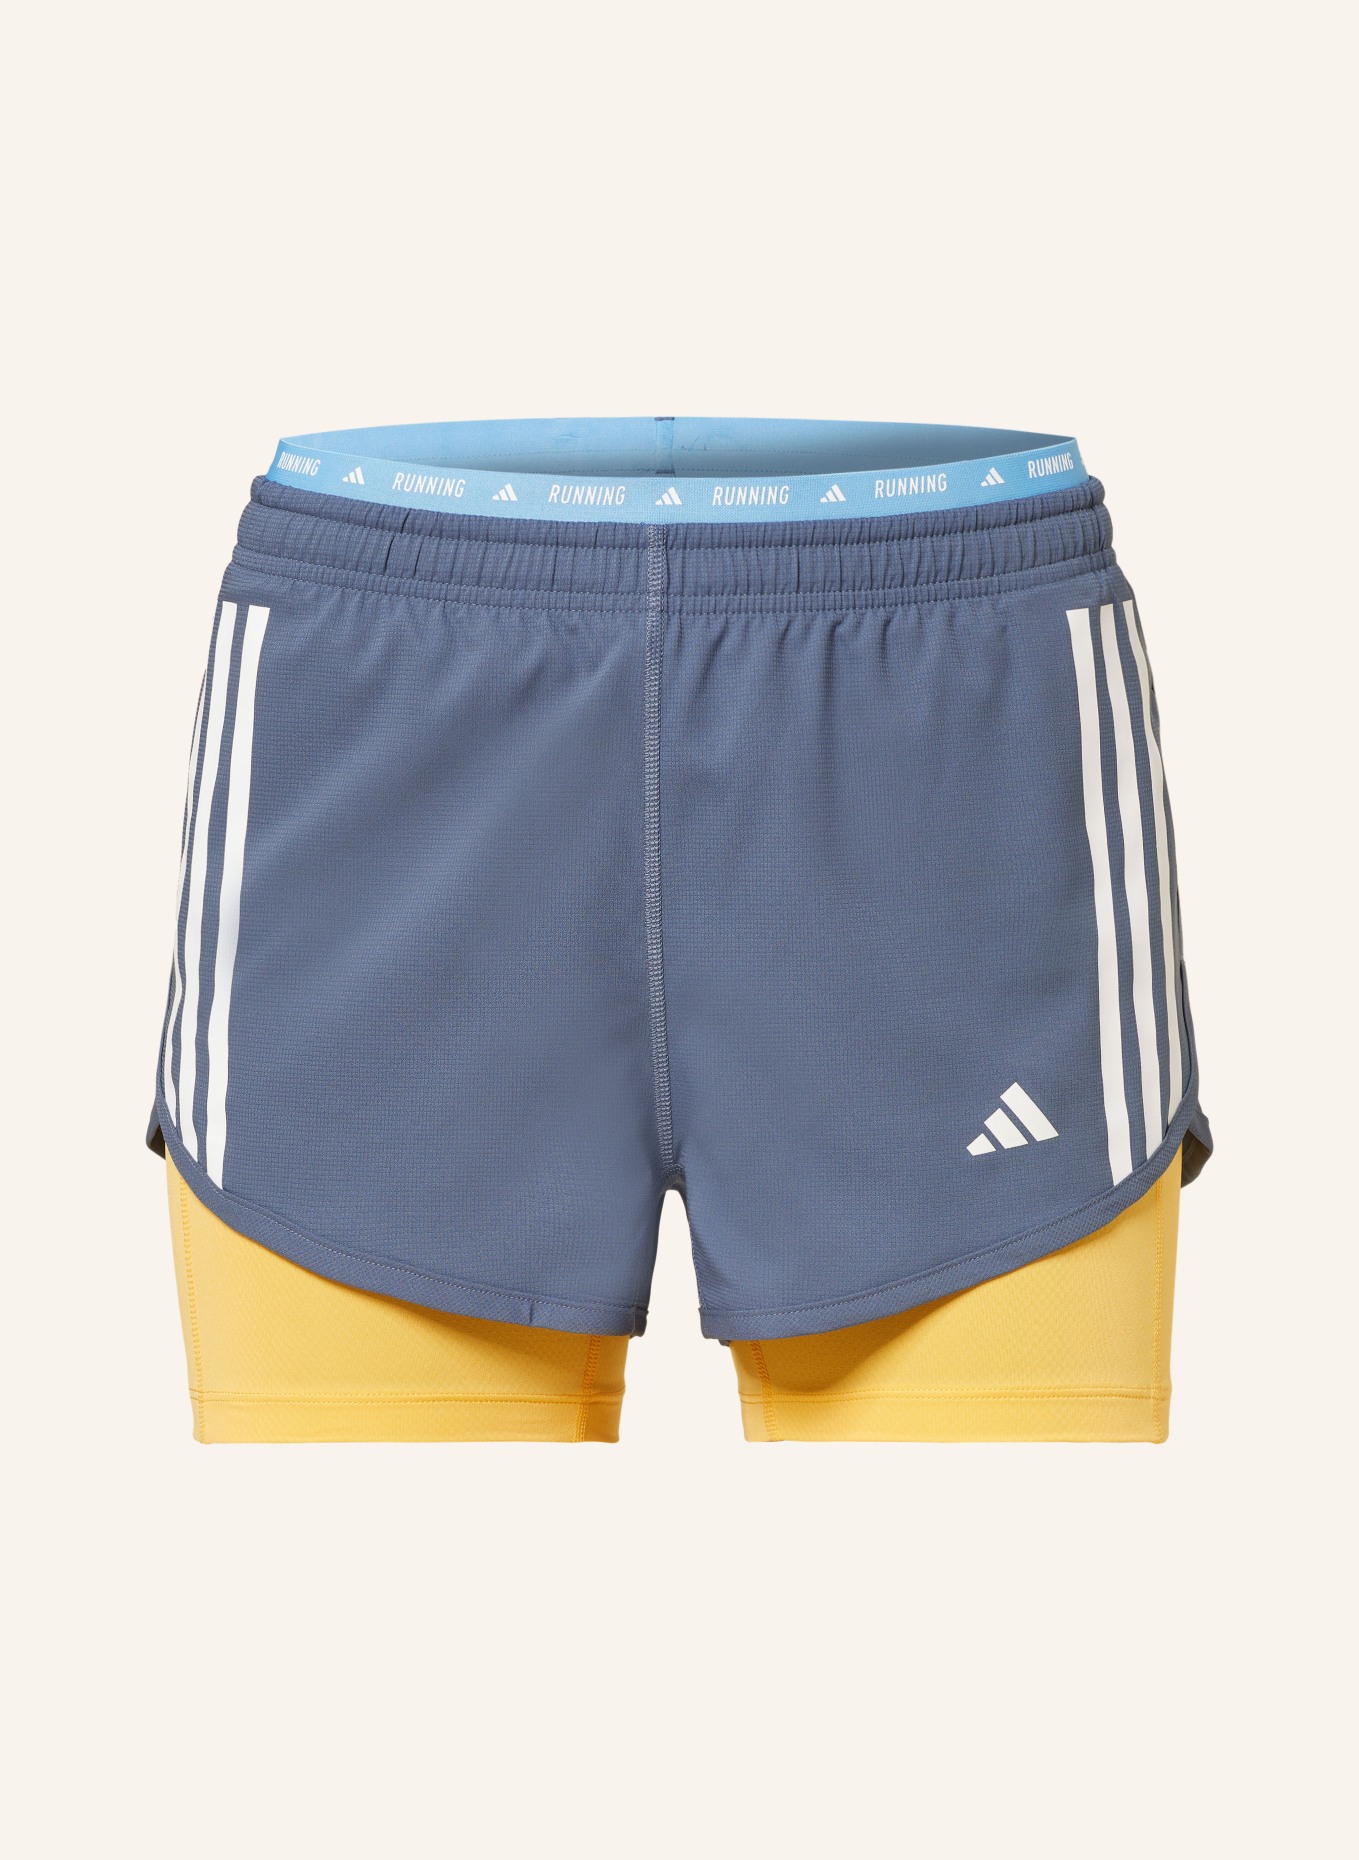 adidas 2-in-1 running shorts OWN THE RUN, Color: BLUE GRAY/ YELLOW (Image 1)